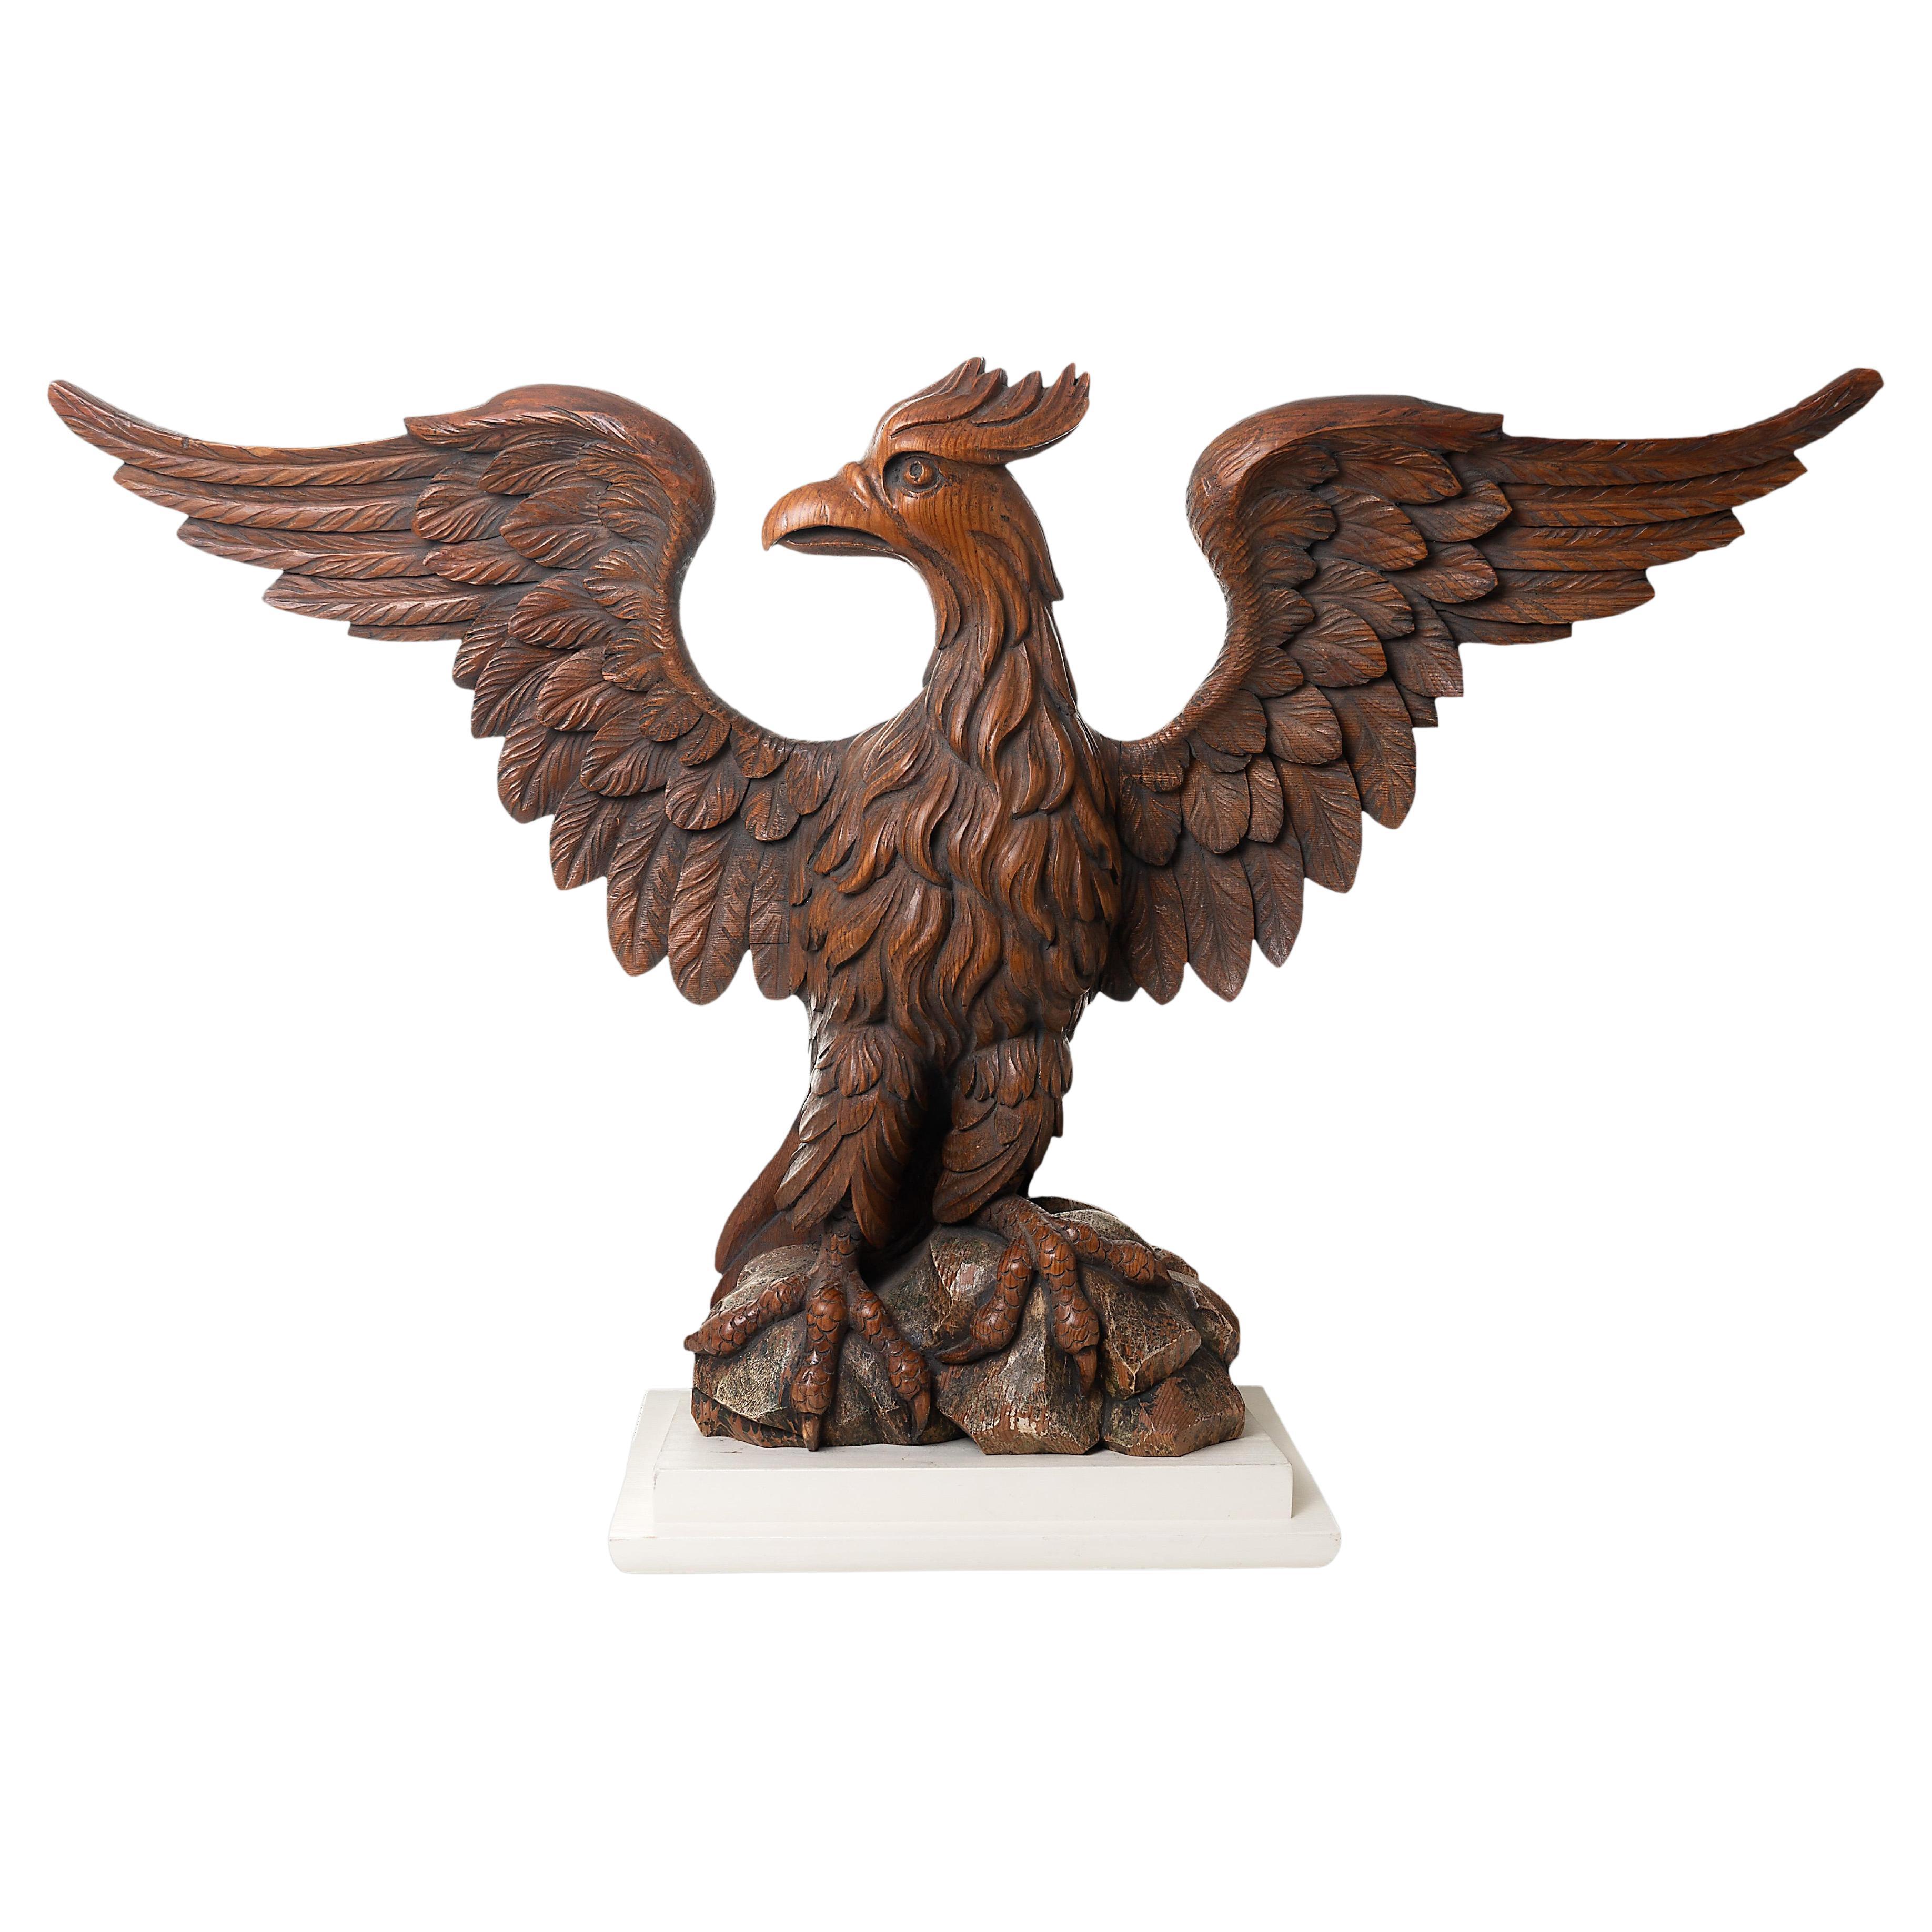 Early 19th Century Carved Wooden Eagle with Wings Spread